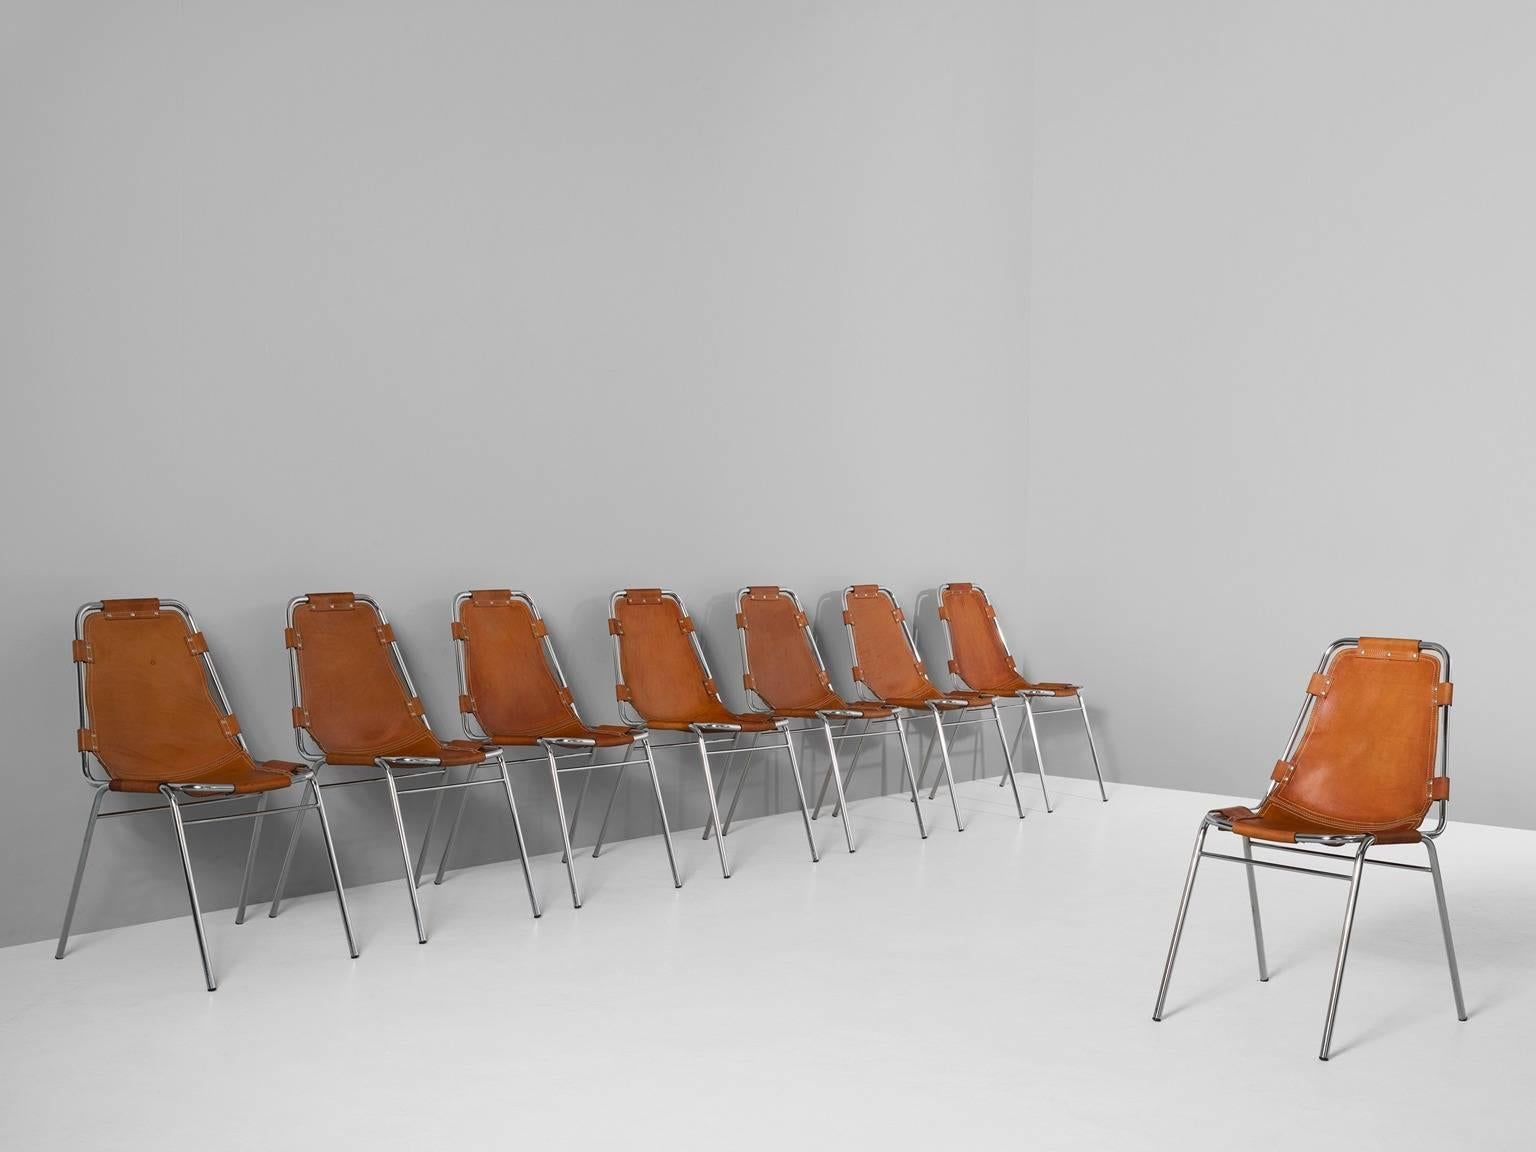 Set of eight chairs, in steel and leather,  Italy, circa 1970s.

Set of eight chairs of the famous model 'Les Arcs'. The simplistic design consist of a tubular steel frame with a seating of thick cognac saddle leather. The natural leather makes a